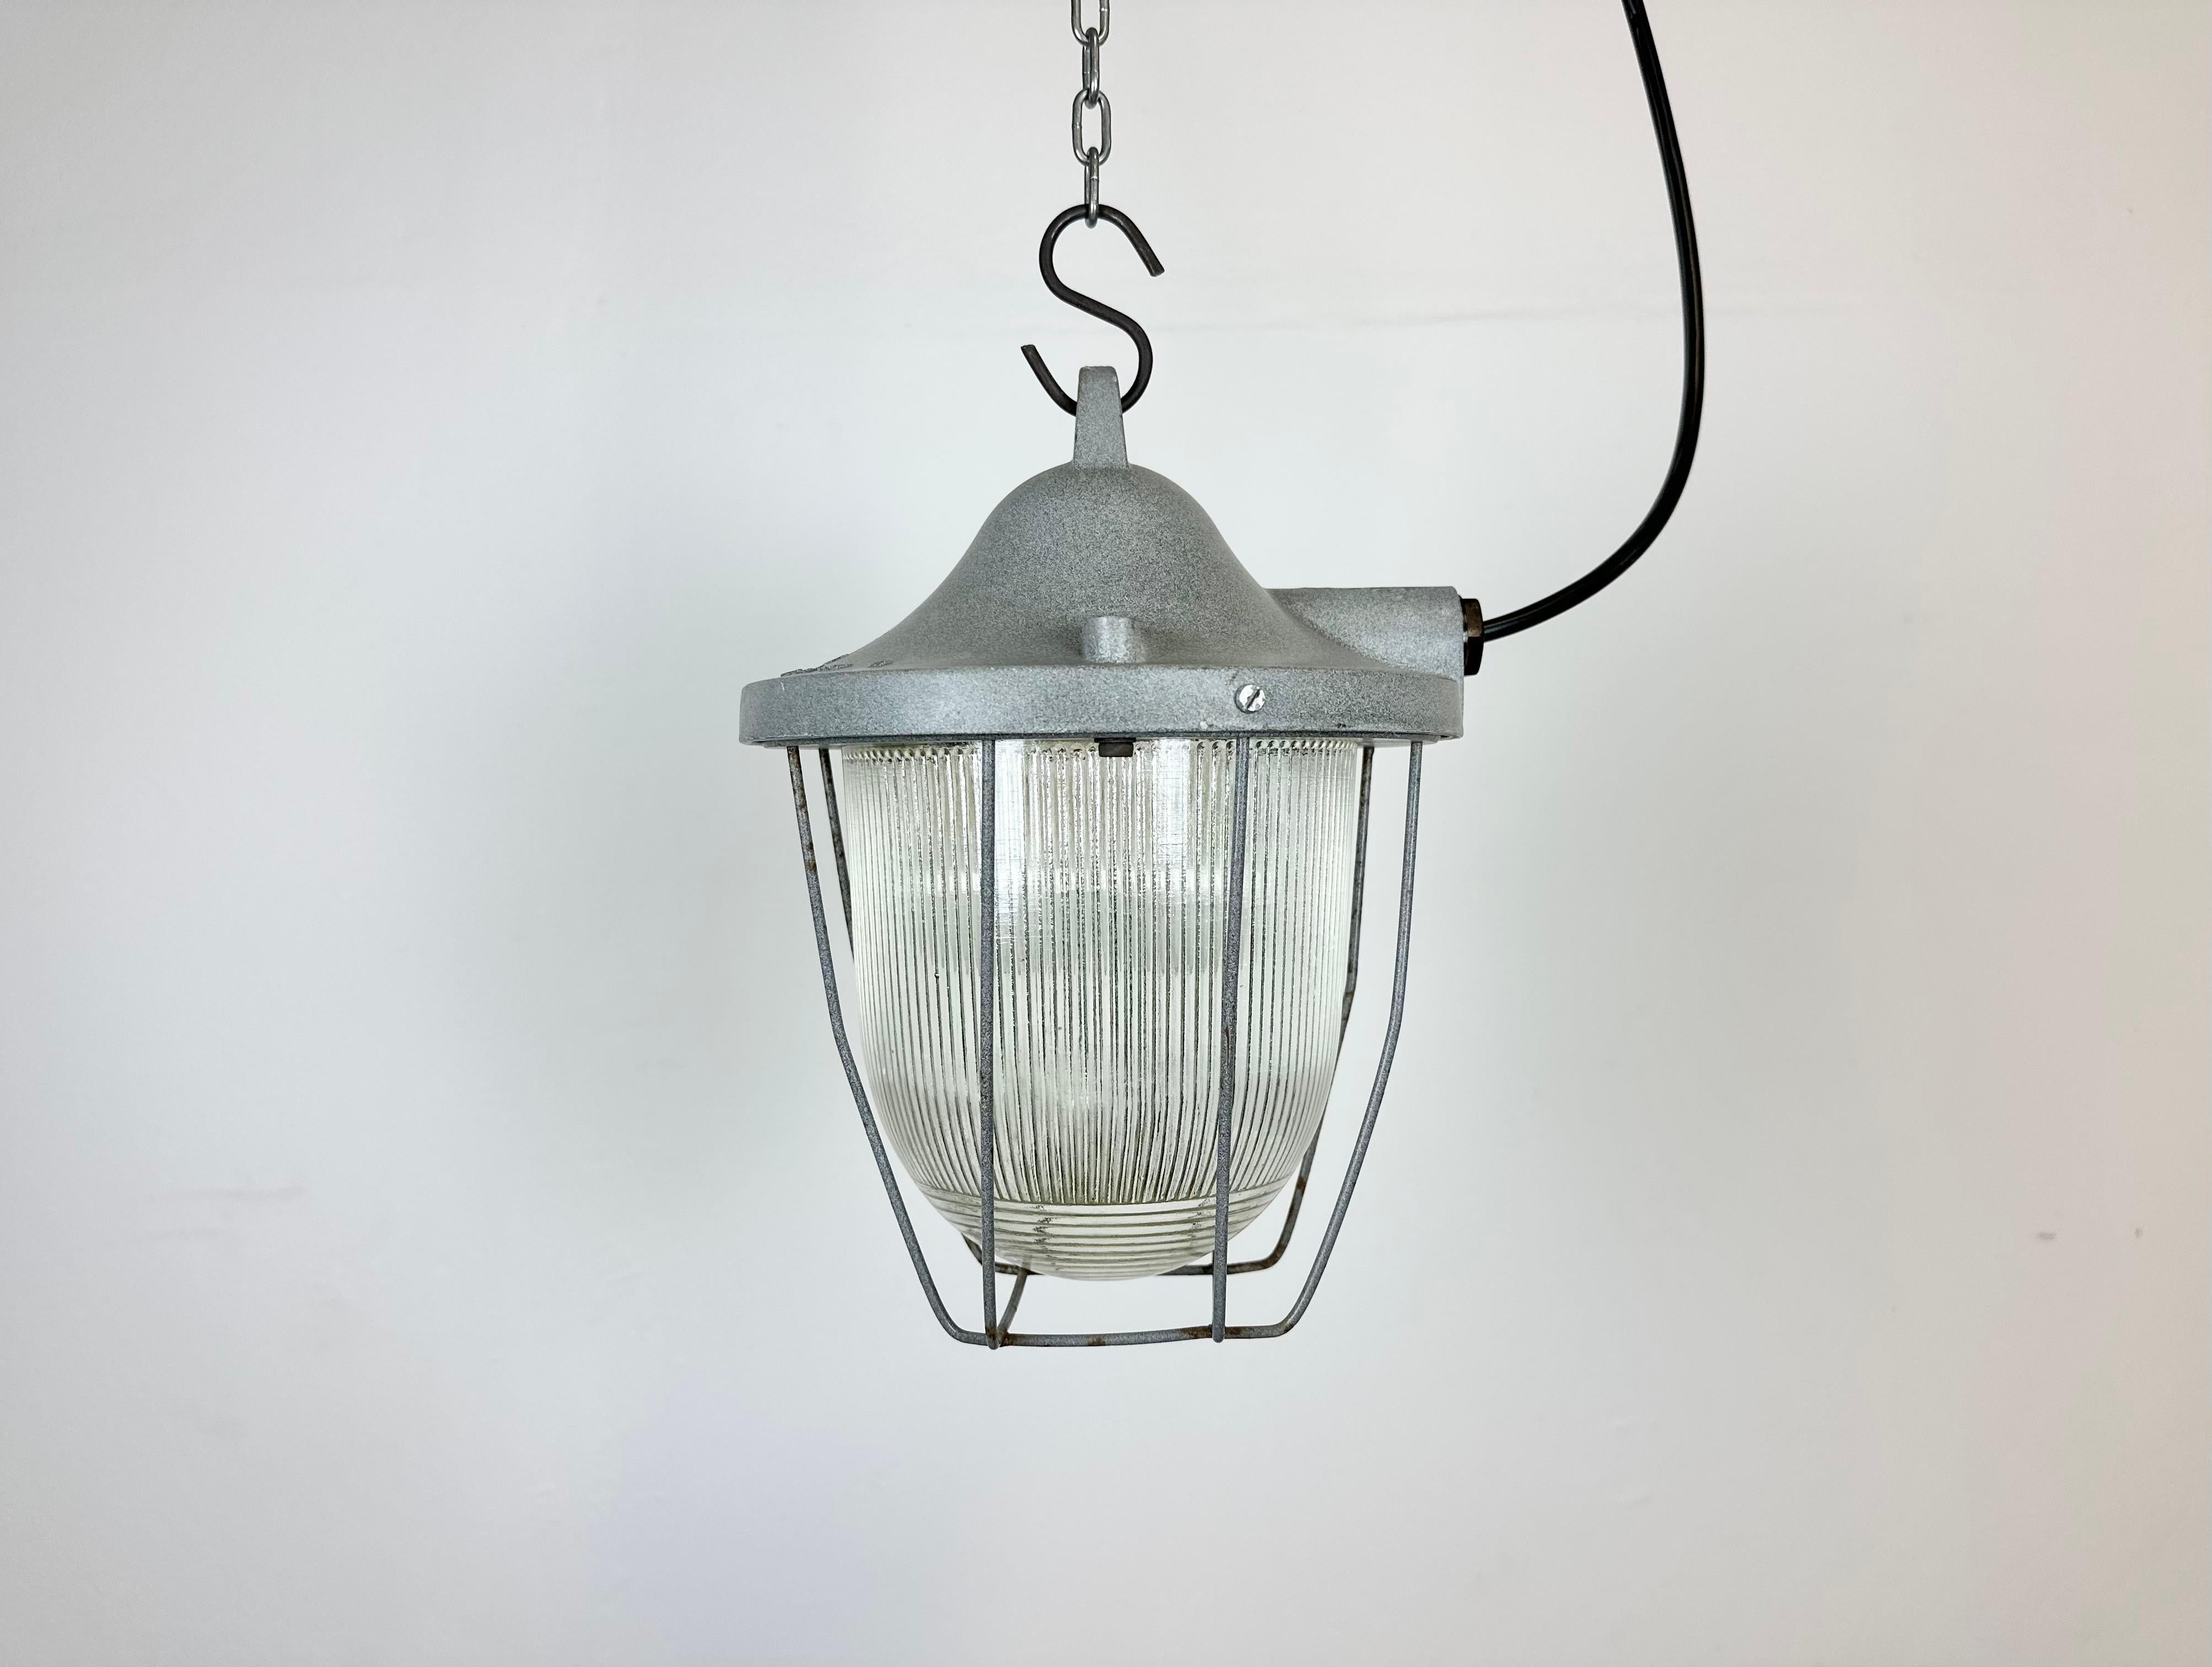 Grey industrial lamp made by Polam Gdansk in Poland during the 1960s. It features a cast aluminium body, an iron cage and striped glass. The porcelain socket requires E 27/ E 26 lightbulbs. New wire. The weight of the lamp is 2,5 kg.
   